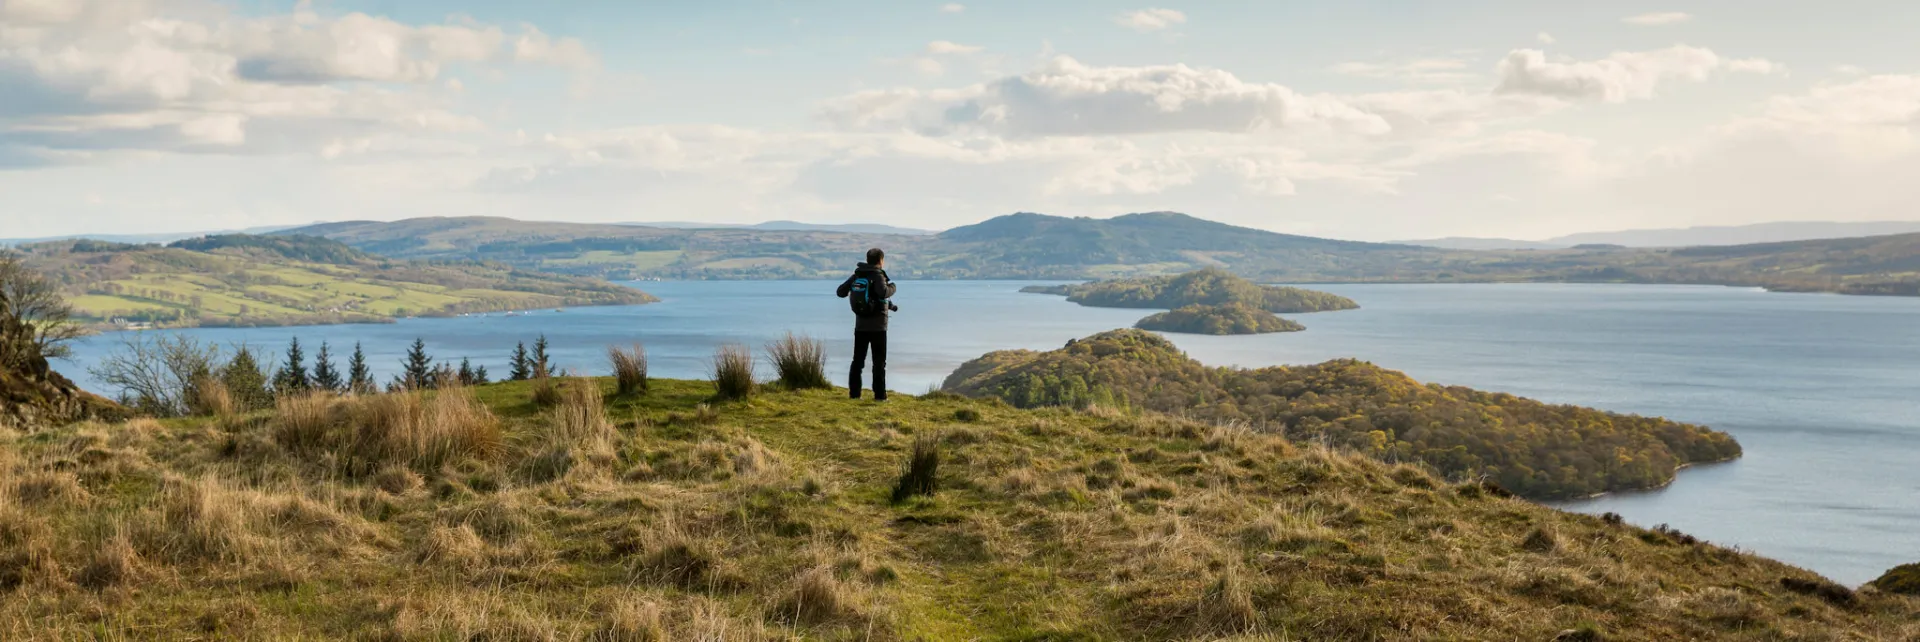 Walker on Conic Hill overlooking Loch Lomond - part of the West Highland Way © VisitScotland / Kenny Lam